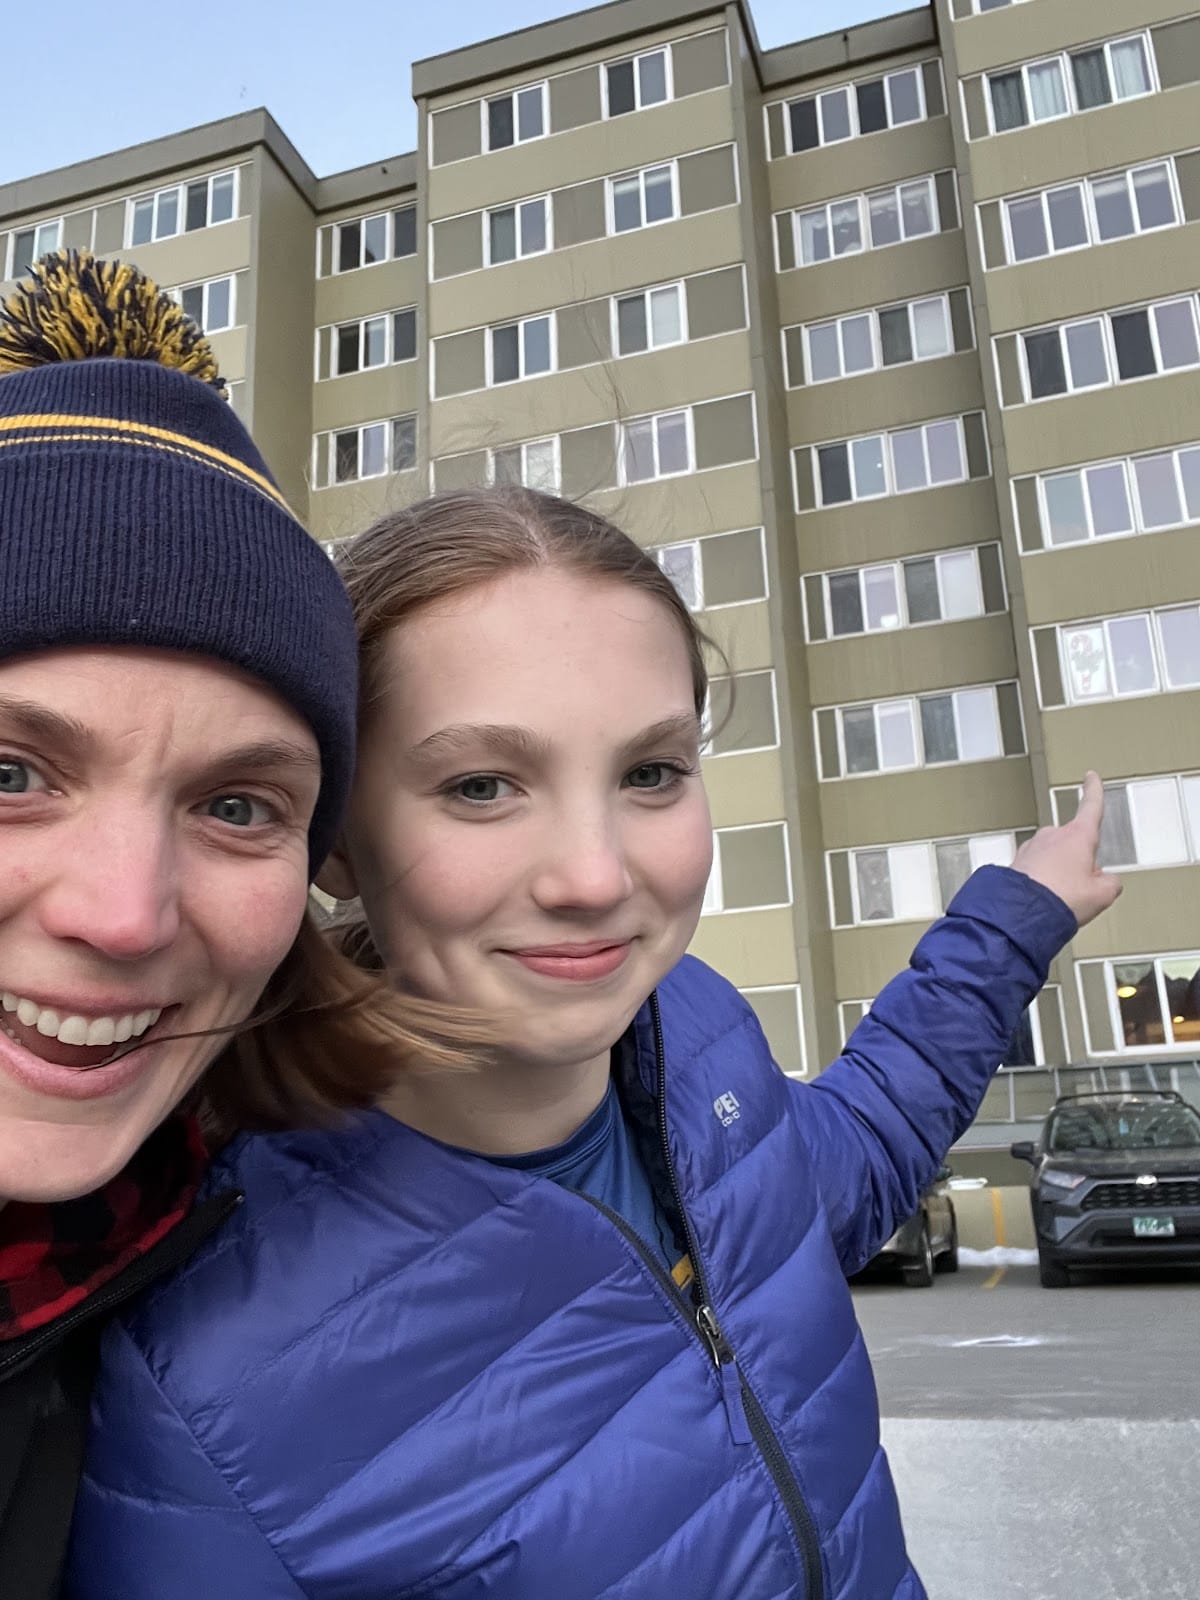 Selfie of a two people pointing to the building behind them.